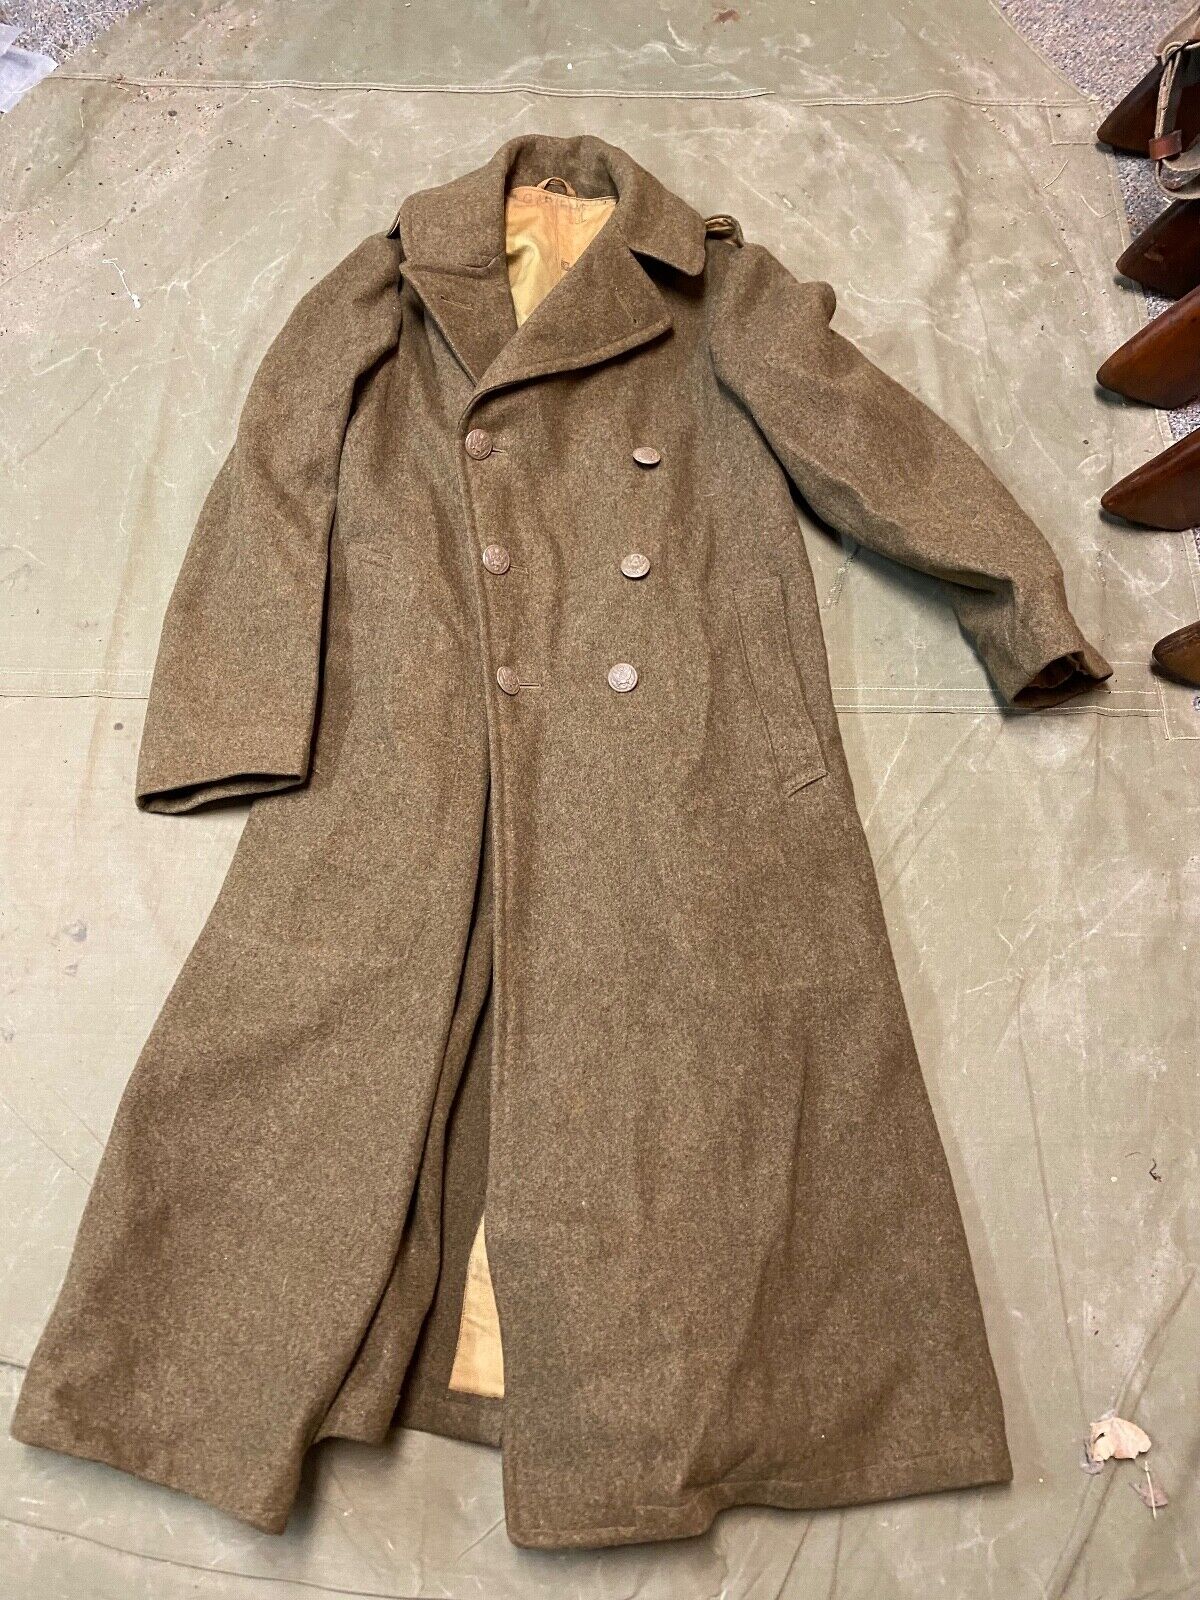 ORIGINAL WWII US ARMY WINTER M1938 GREATCOAT OVERCOAT- LARGE 44R